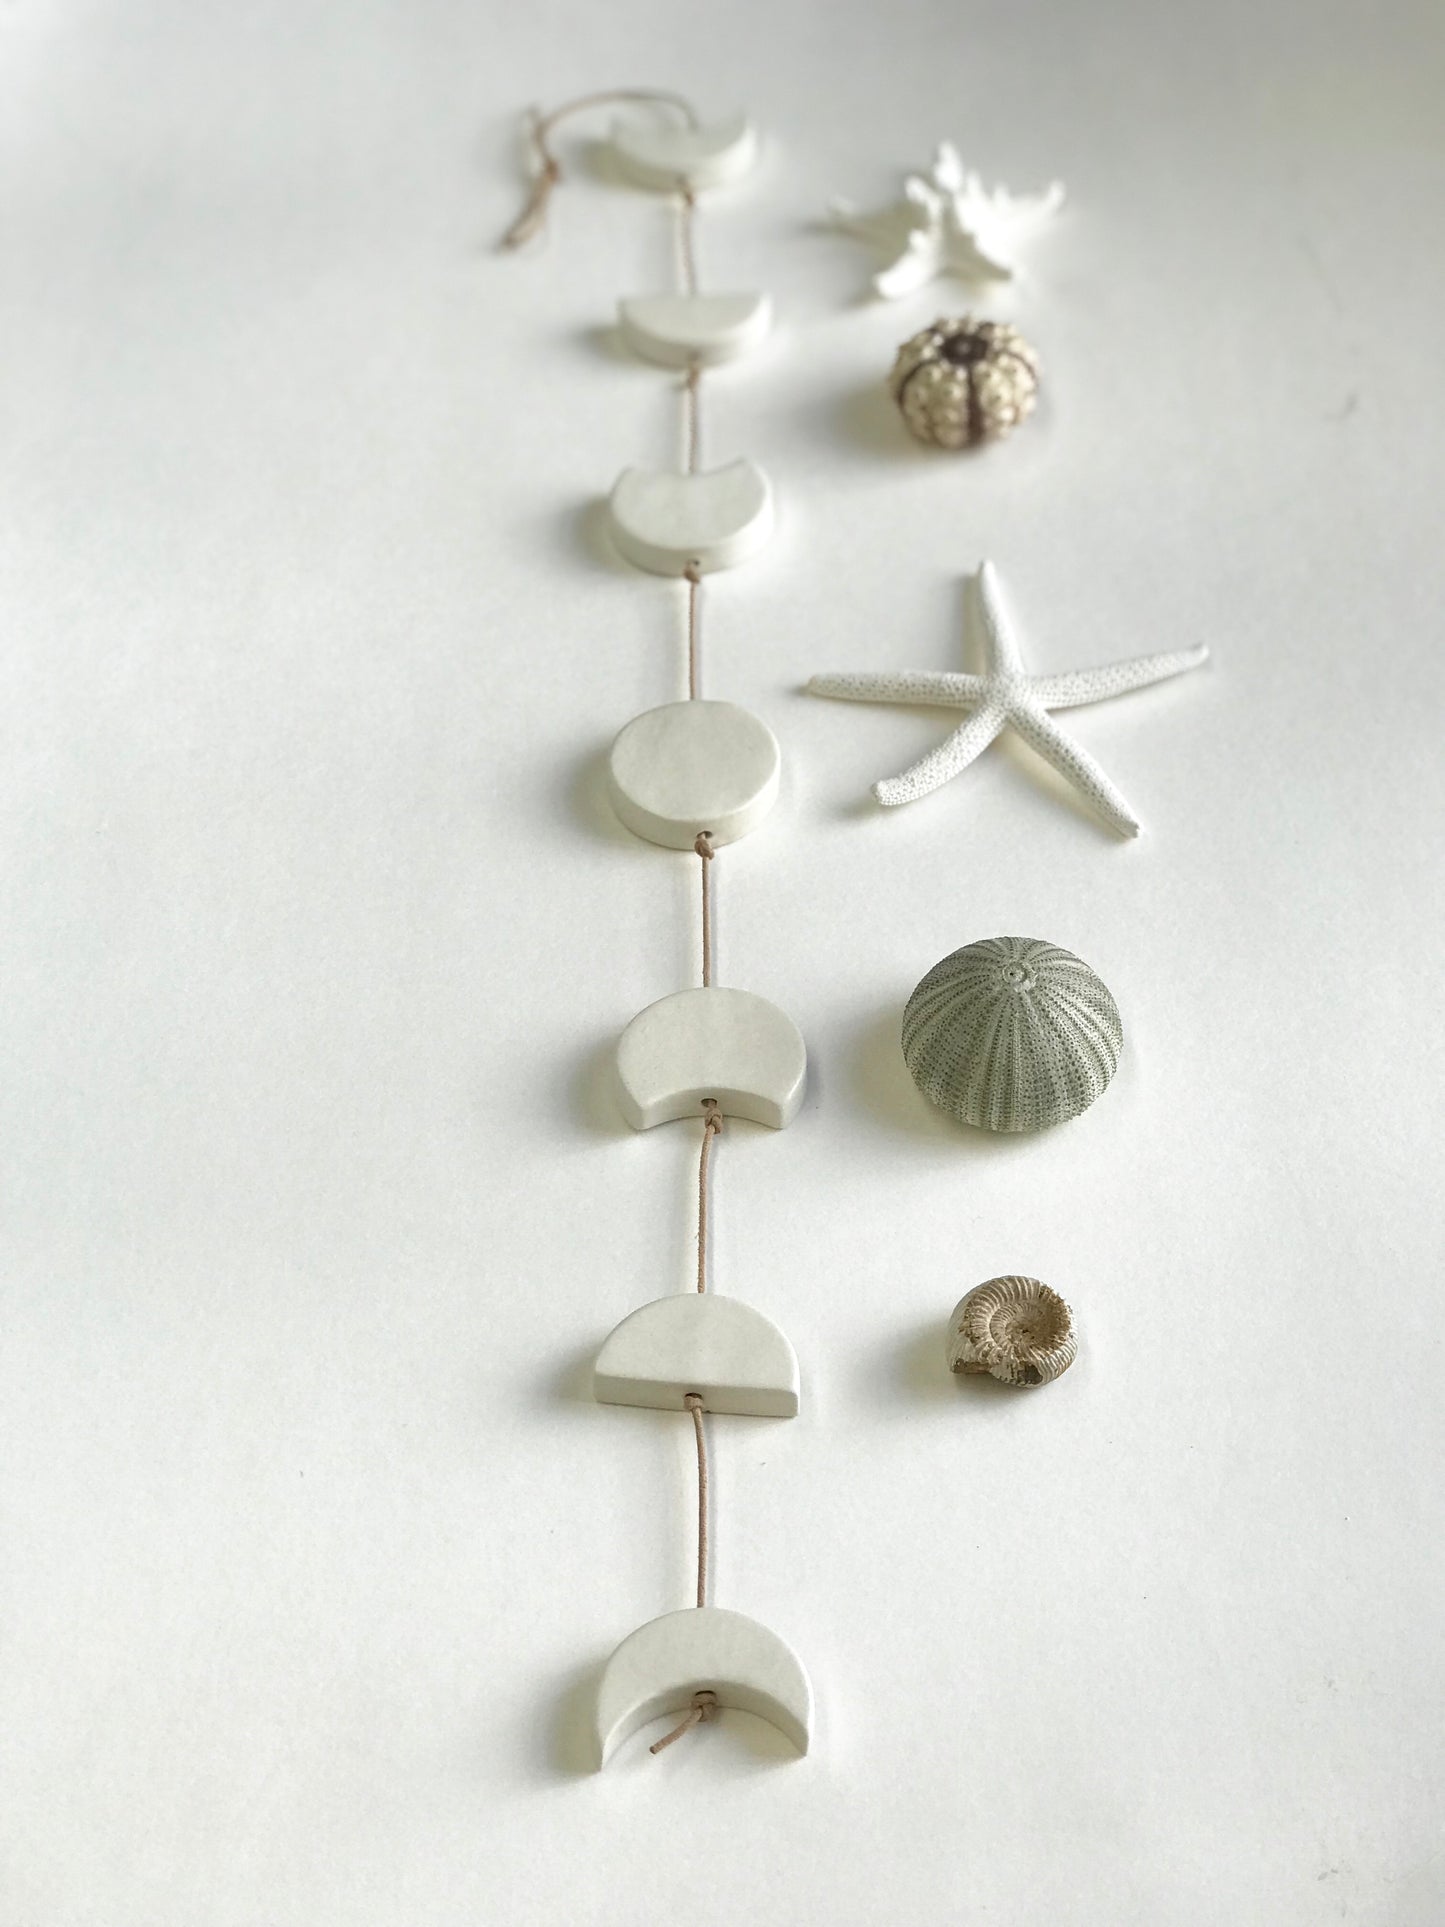 silvered sky & earth; matte white ceramic moon phases vertical wall hanging